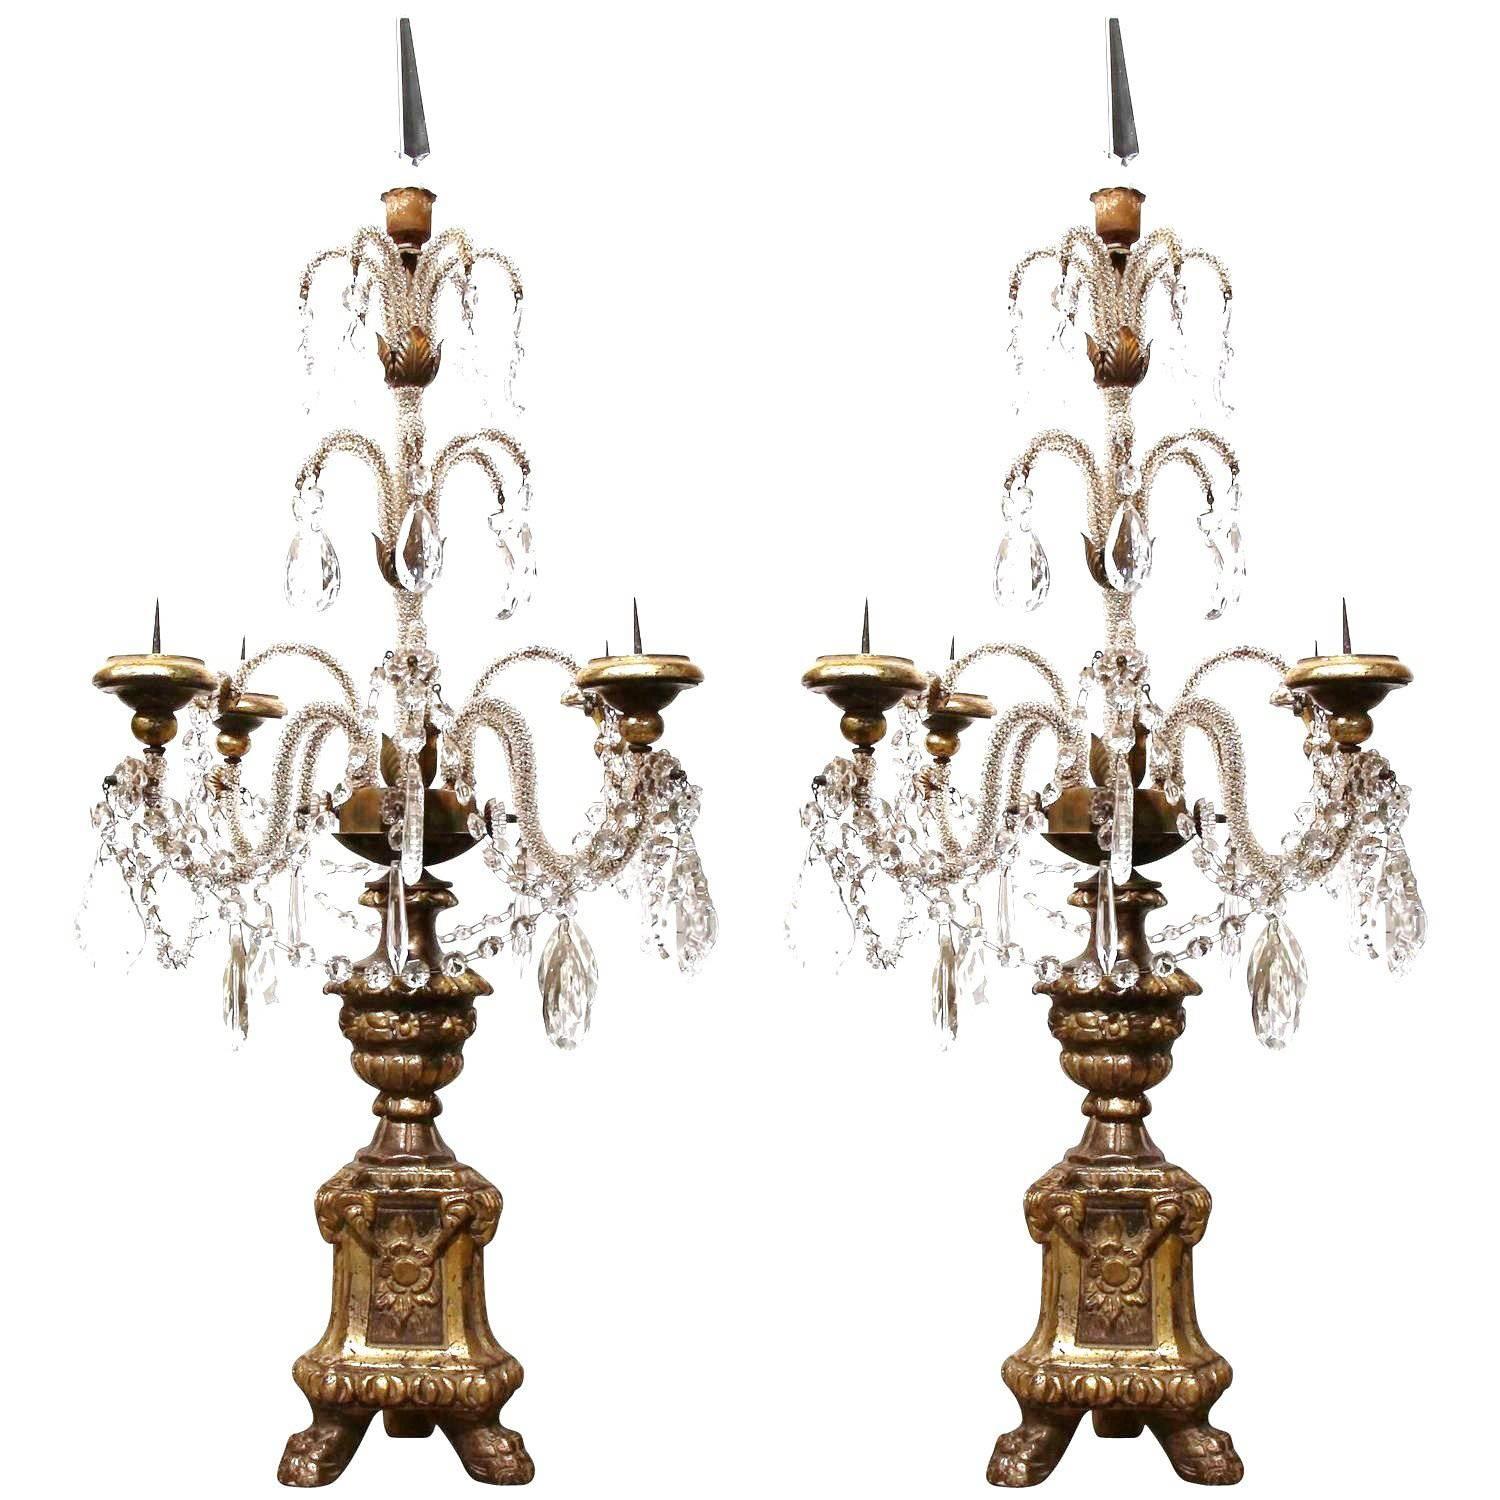 Pair of Early 20th Century Italian Gold Leaf Candlesticks with Crystal and Glass